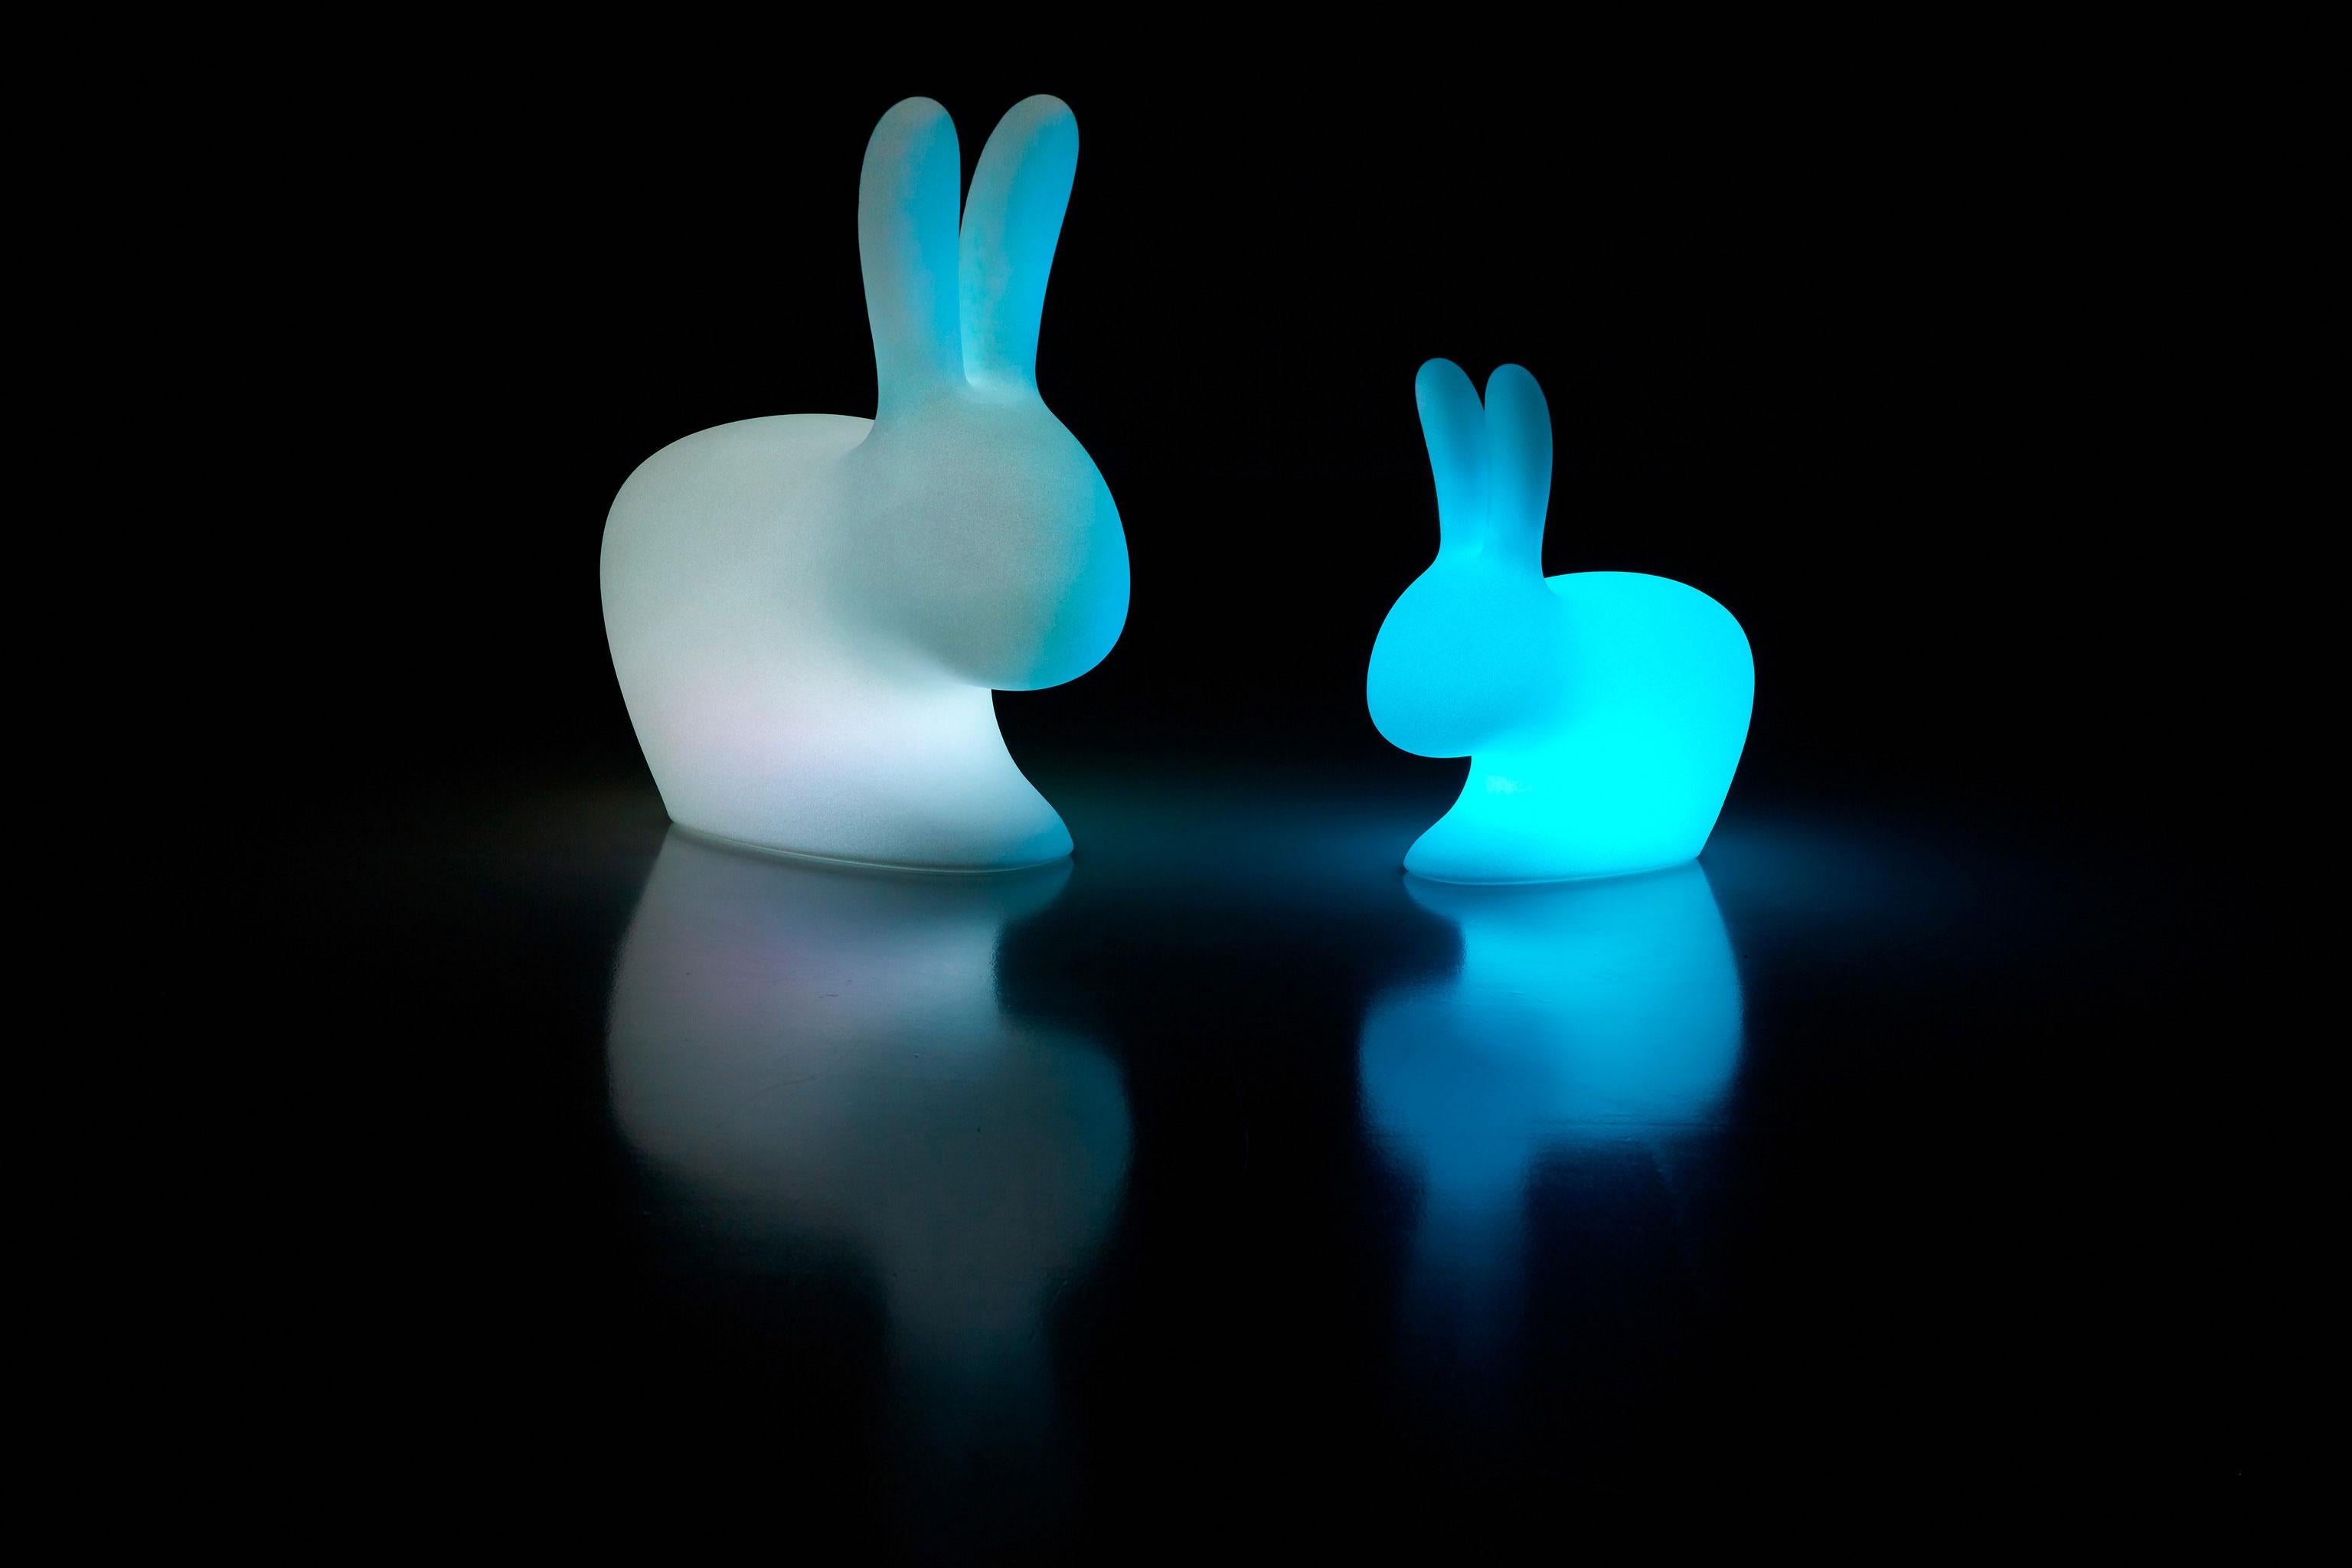 Modern In Stock in Los Angeles, Baby Rabbit Chair LED Lamp by Stefano Giovannoni